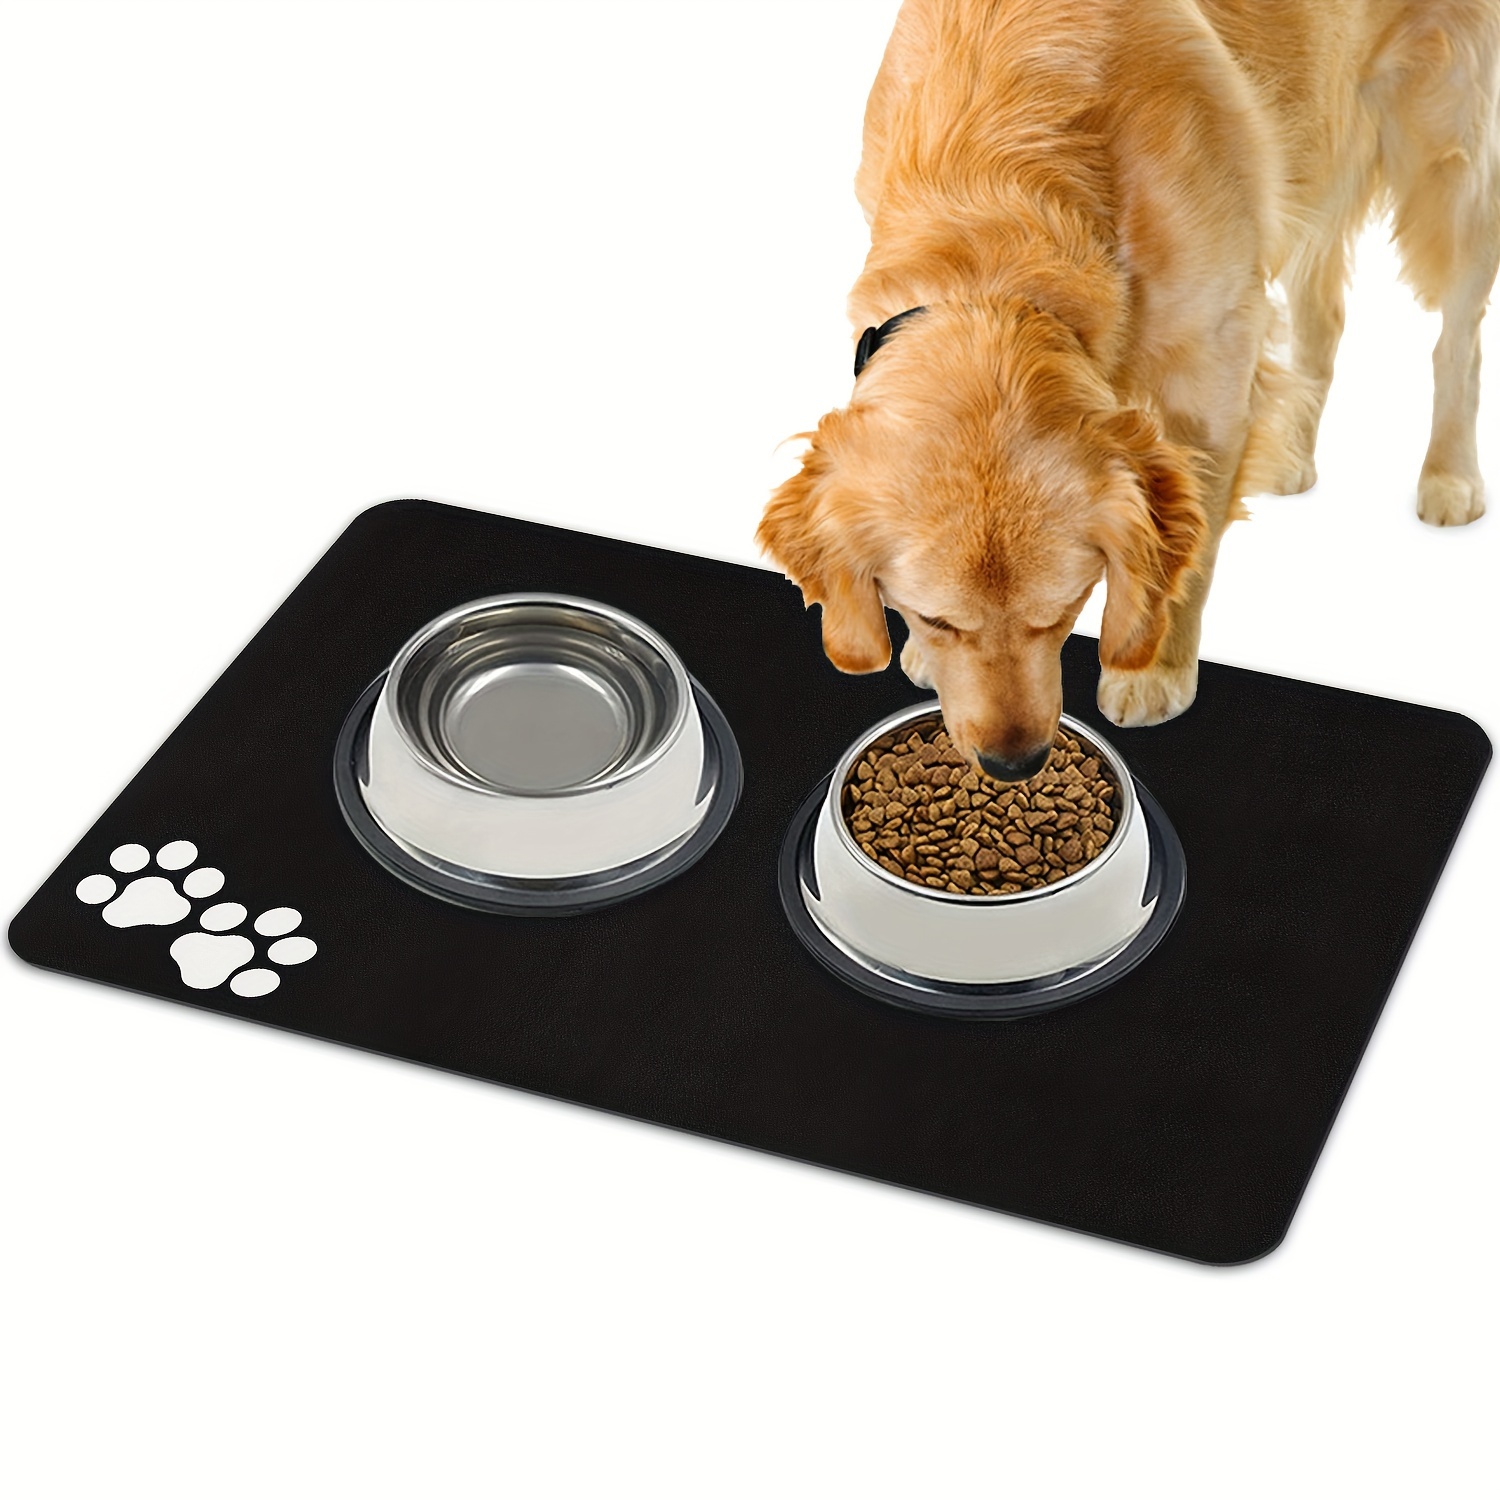 Absorbent Food Mats For Dogs